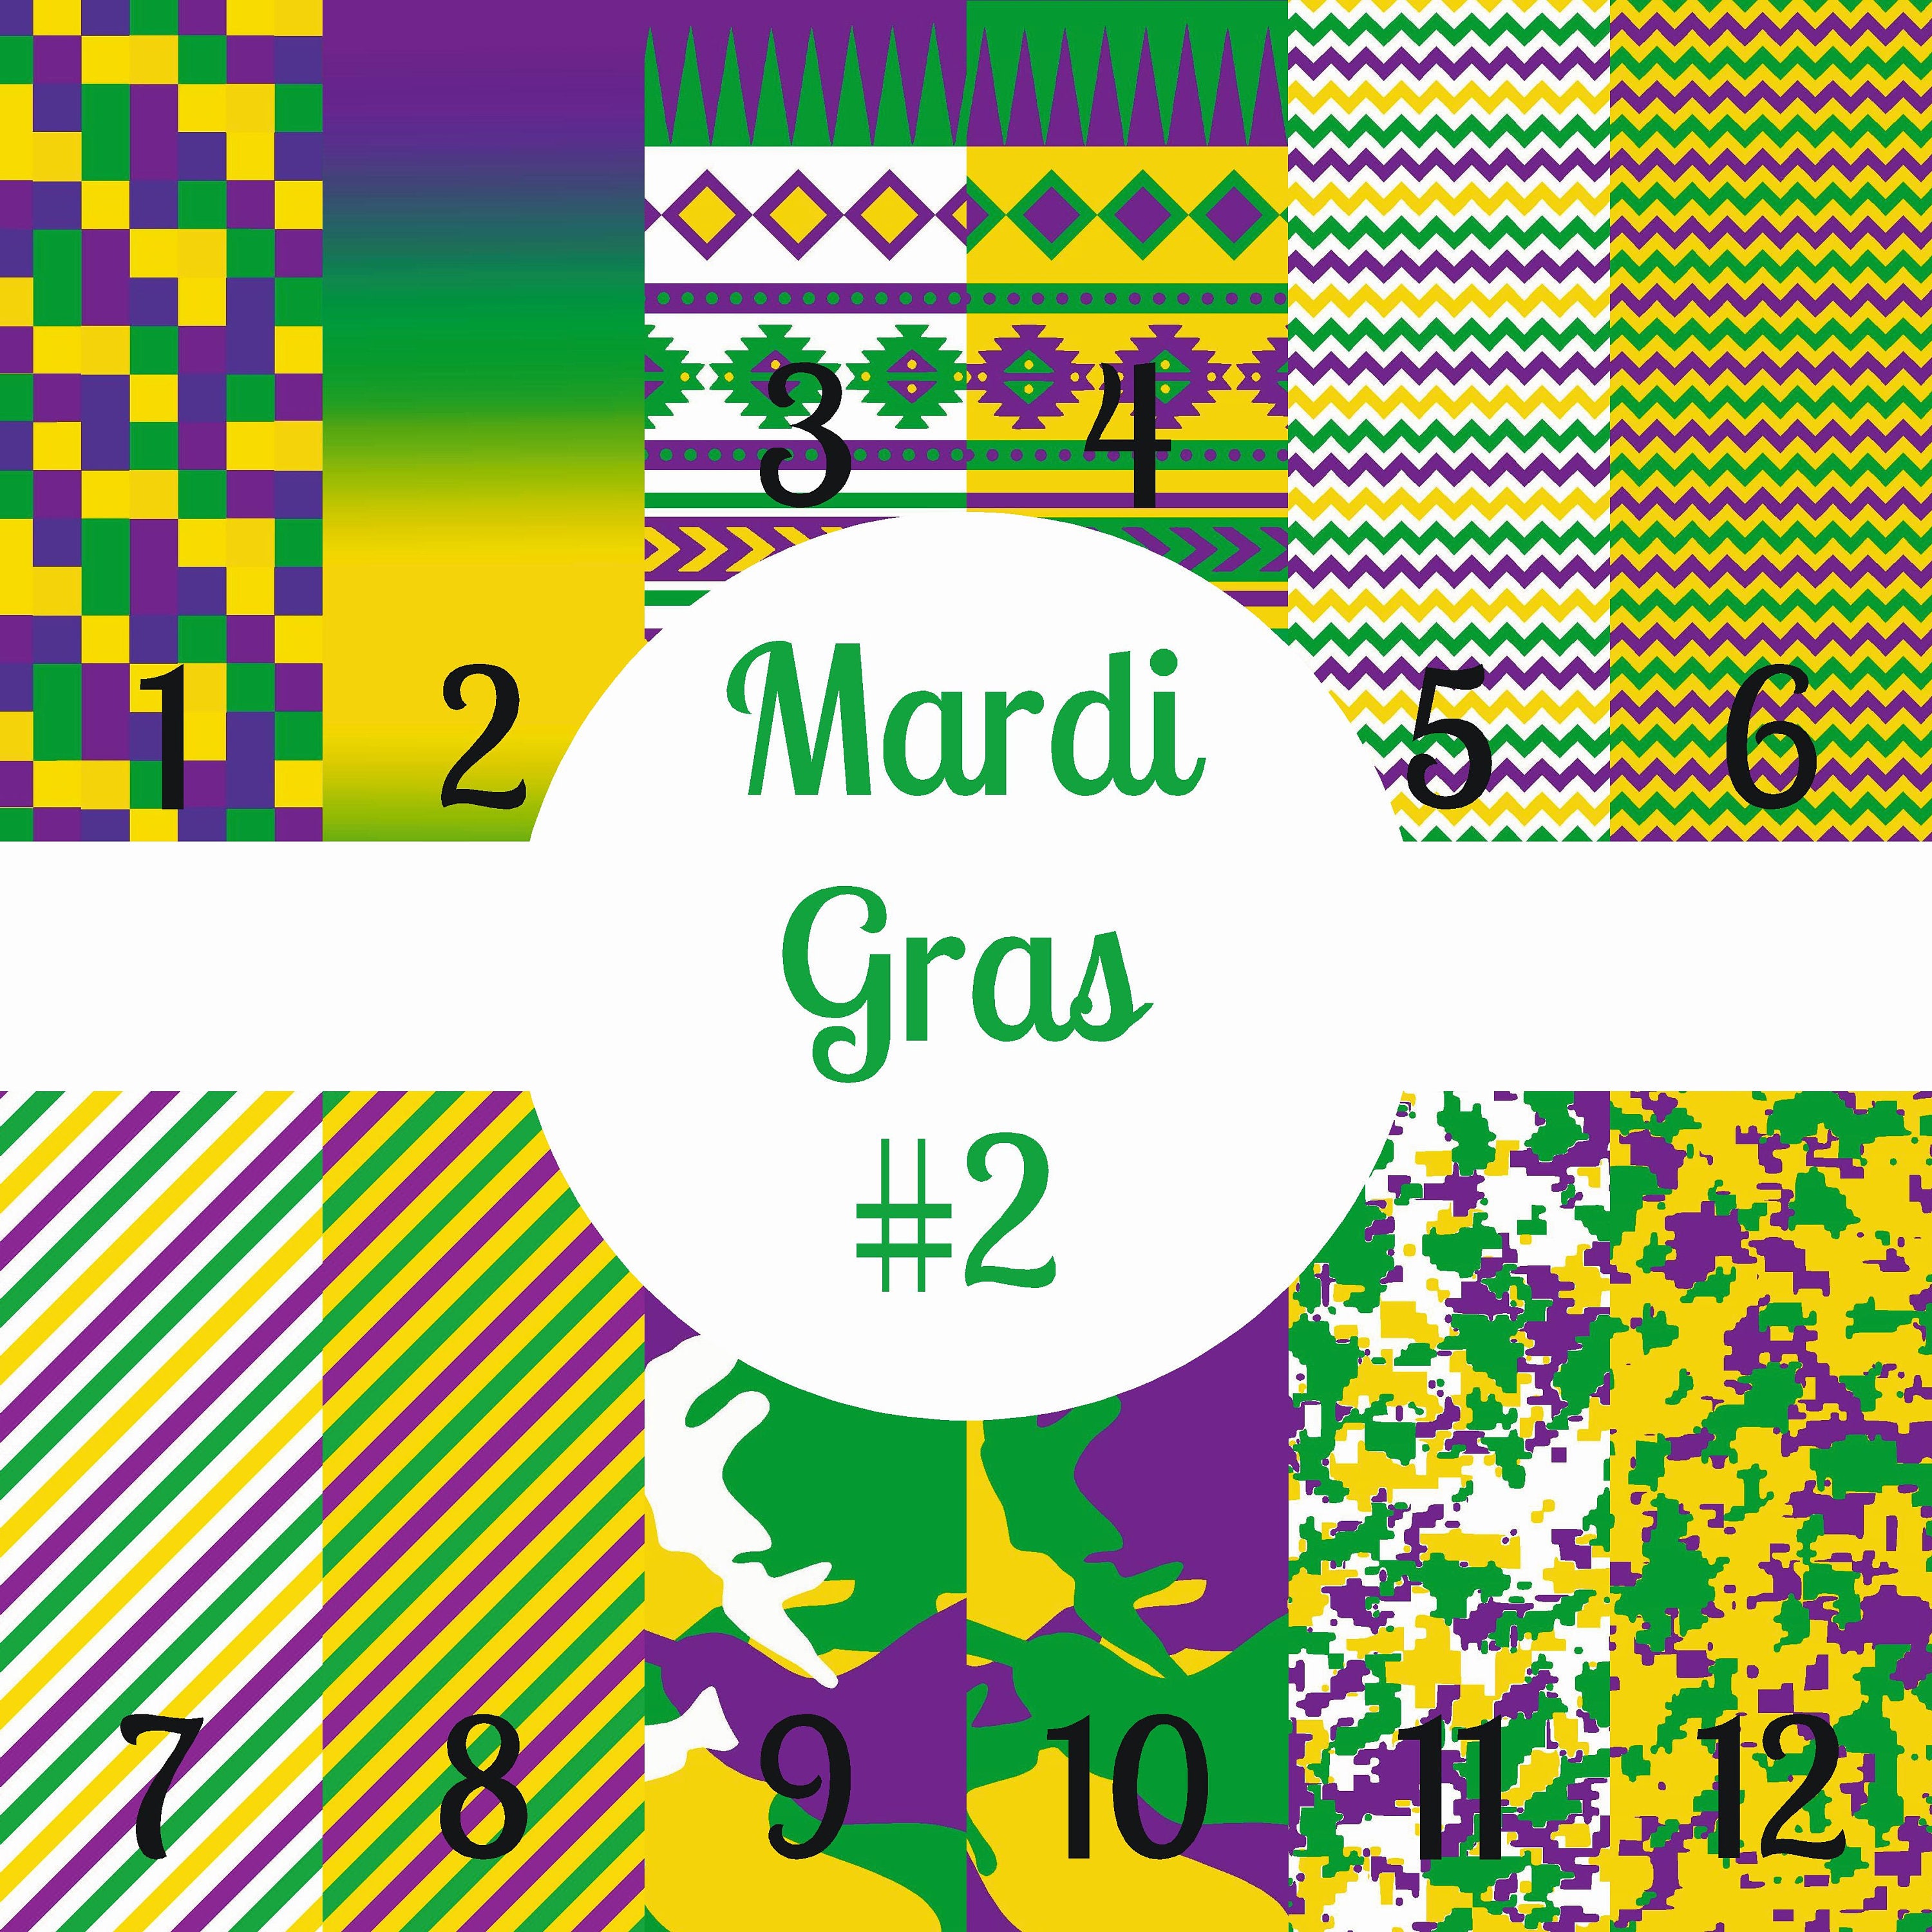 1/2/3pc,Mardi Gras Carnival Iron-On Transfer For Clothing Patches